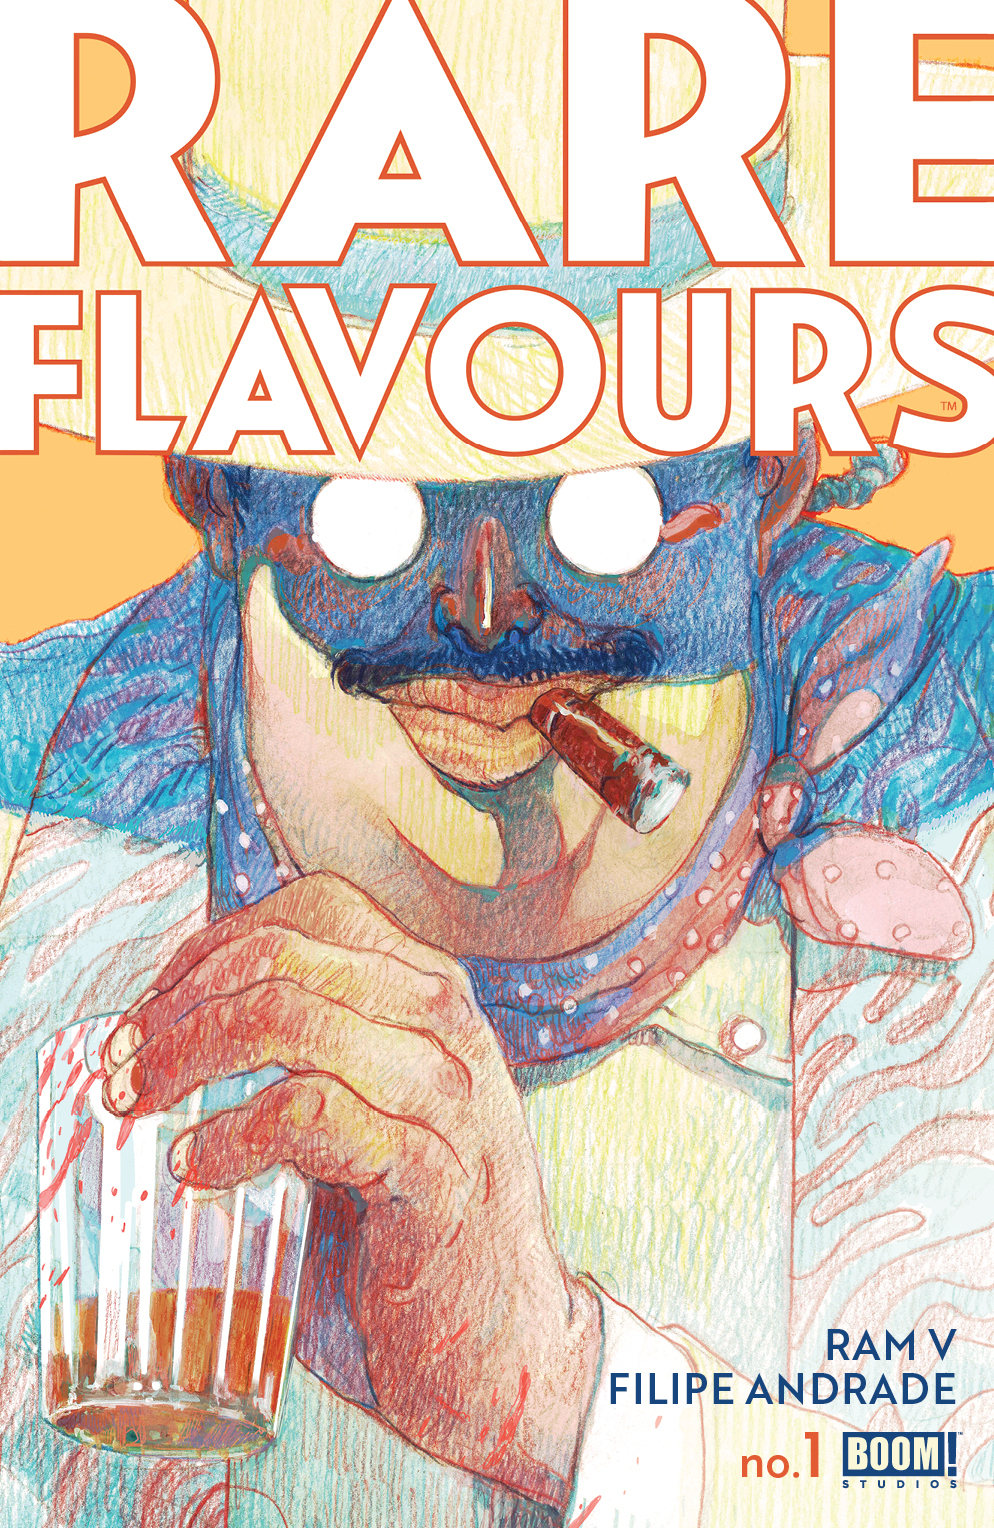 RARE FLAVOURS #1 - Cover A